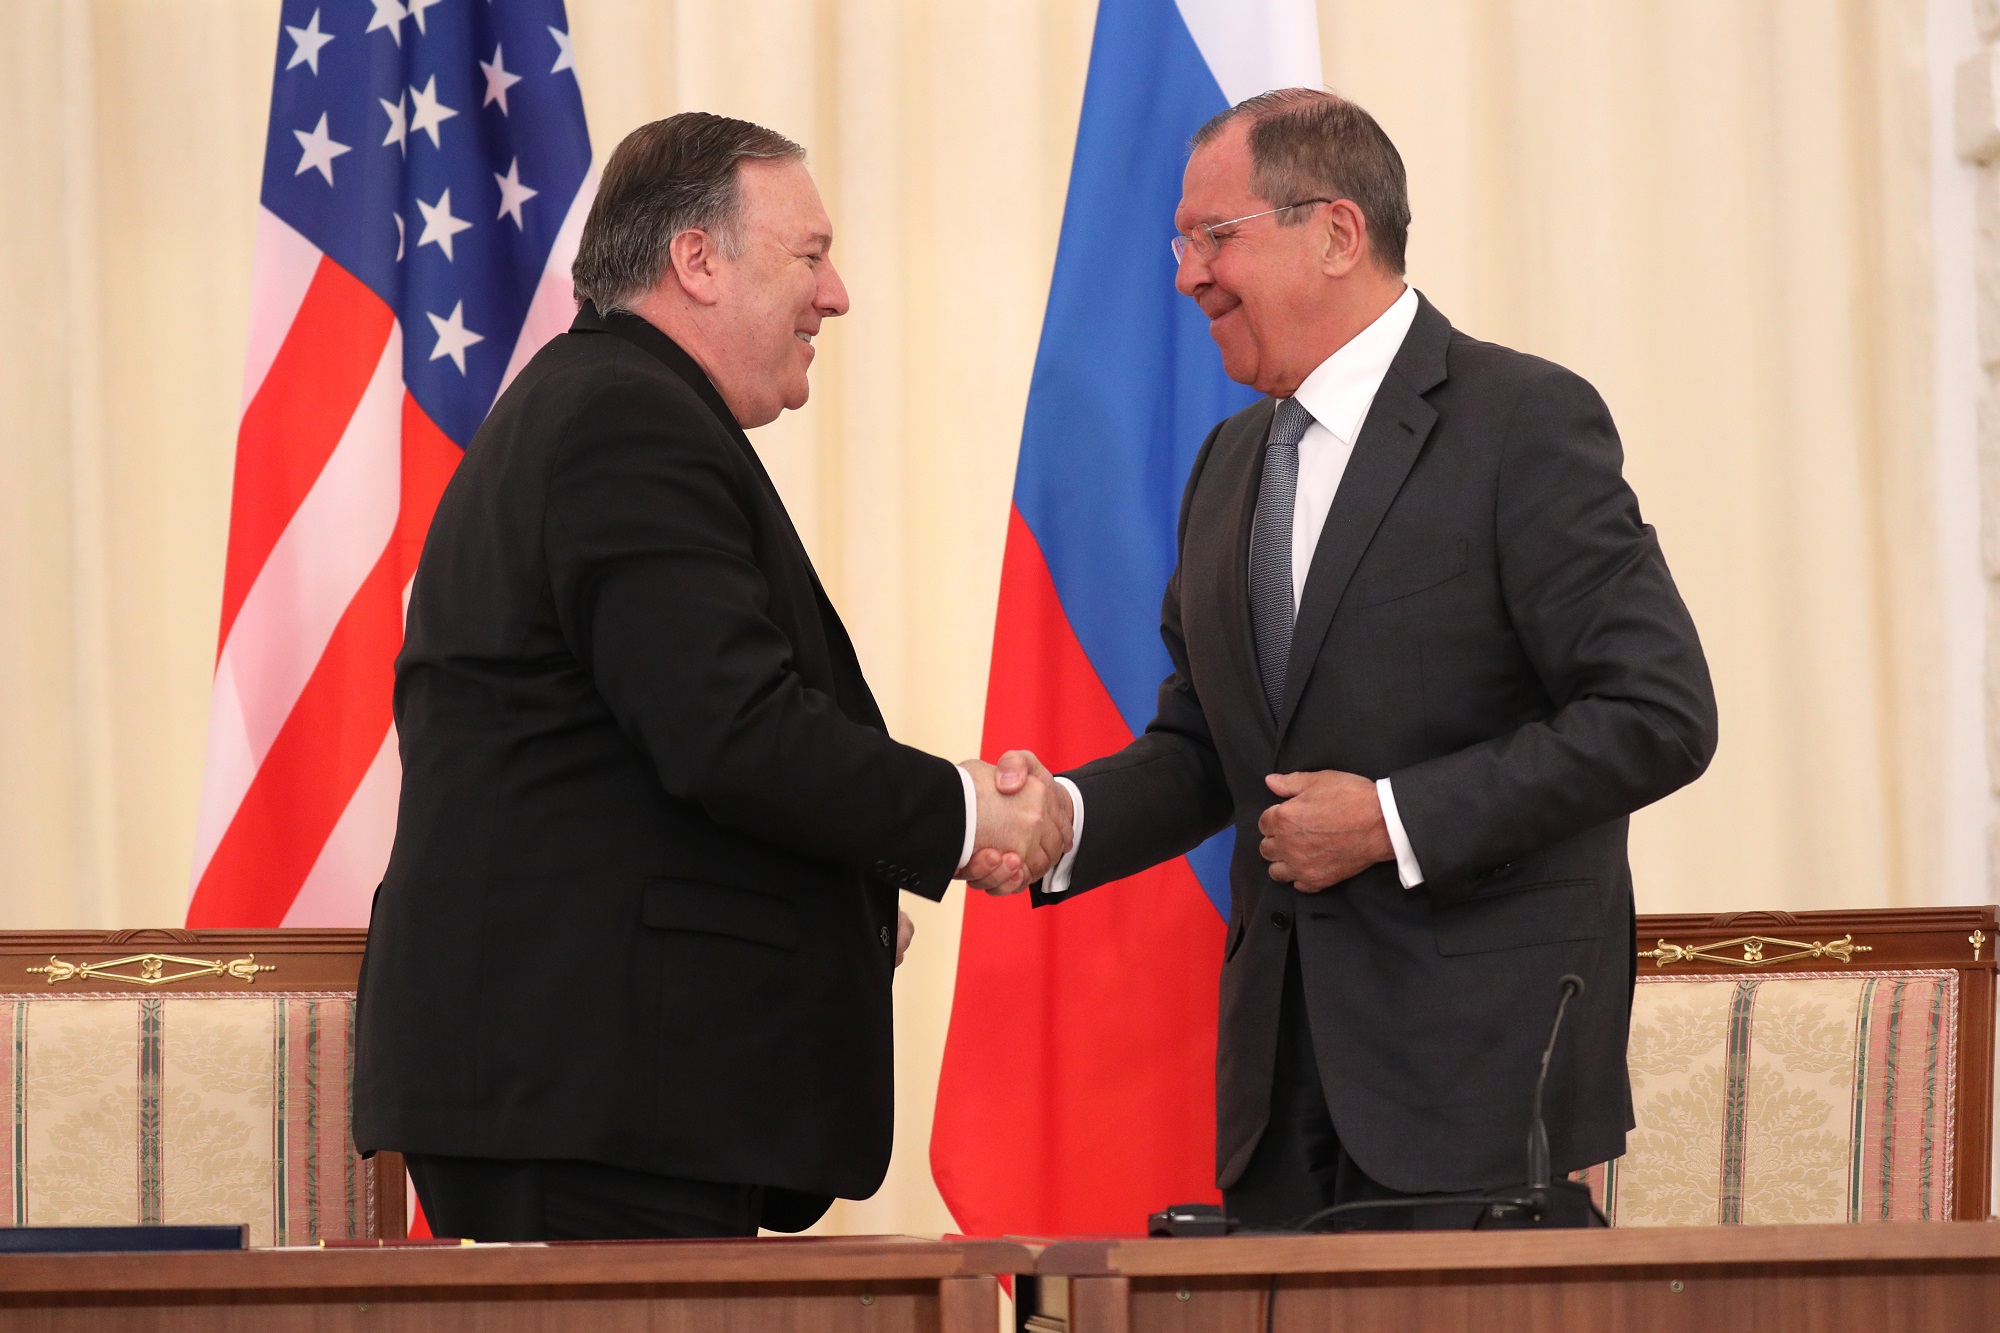 A photograph of Foreign Minister Sergey Lavrov’s remarks and answers to media questions at a joint news conference following talks with US Secretary of State Mike Pompeo, Sochi, May 14, 2019.